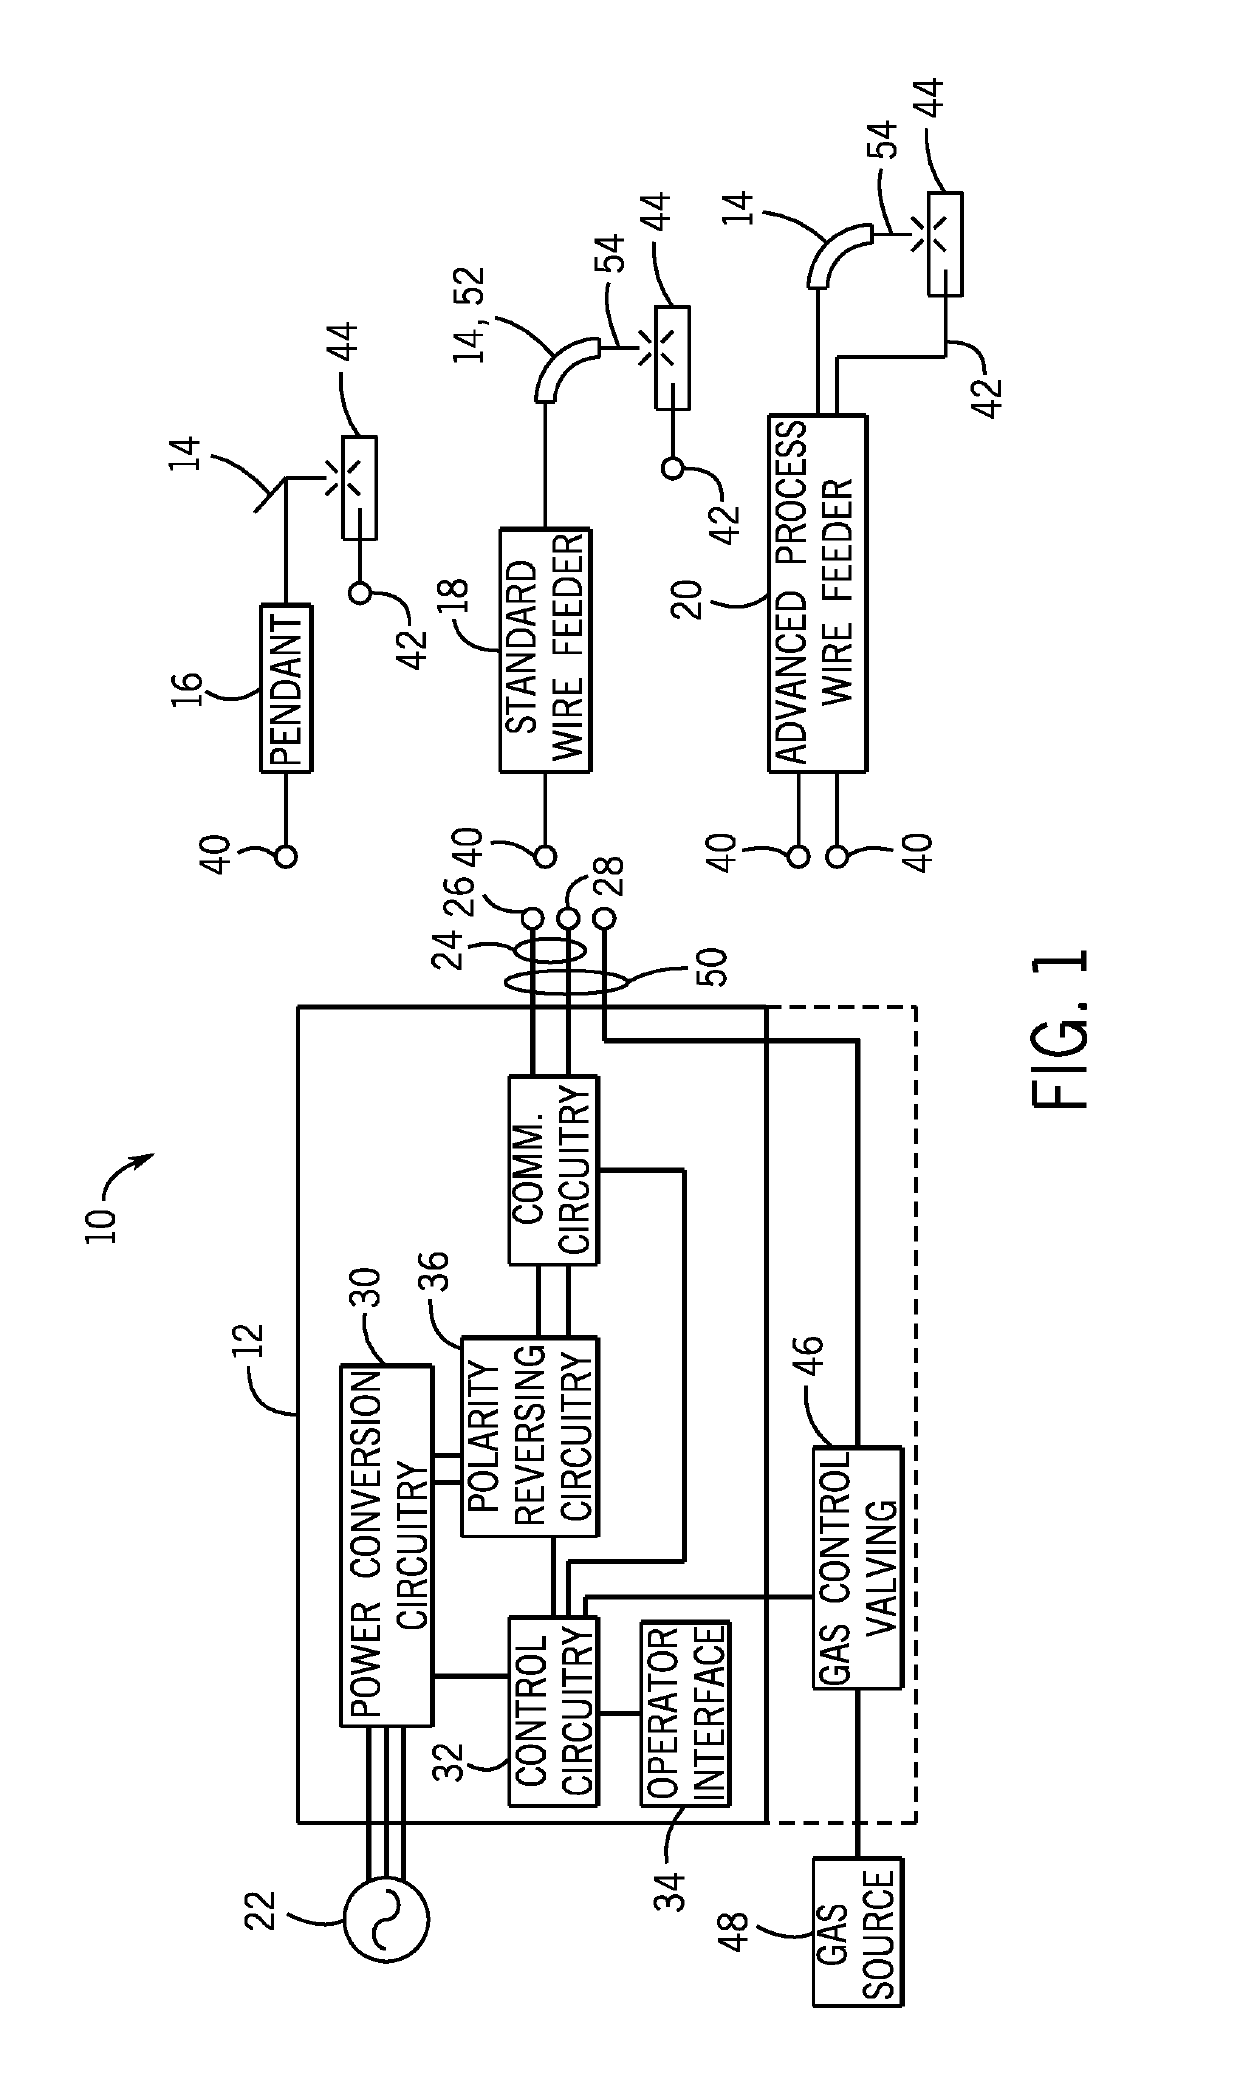 Welding wire feeder bus control system and method